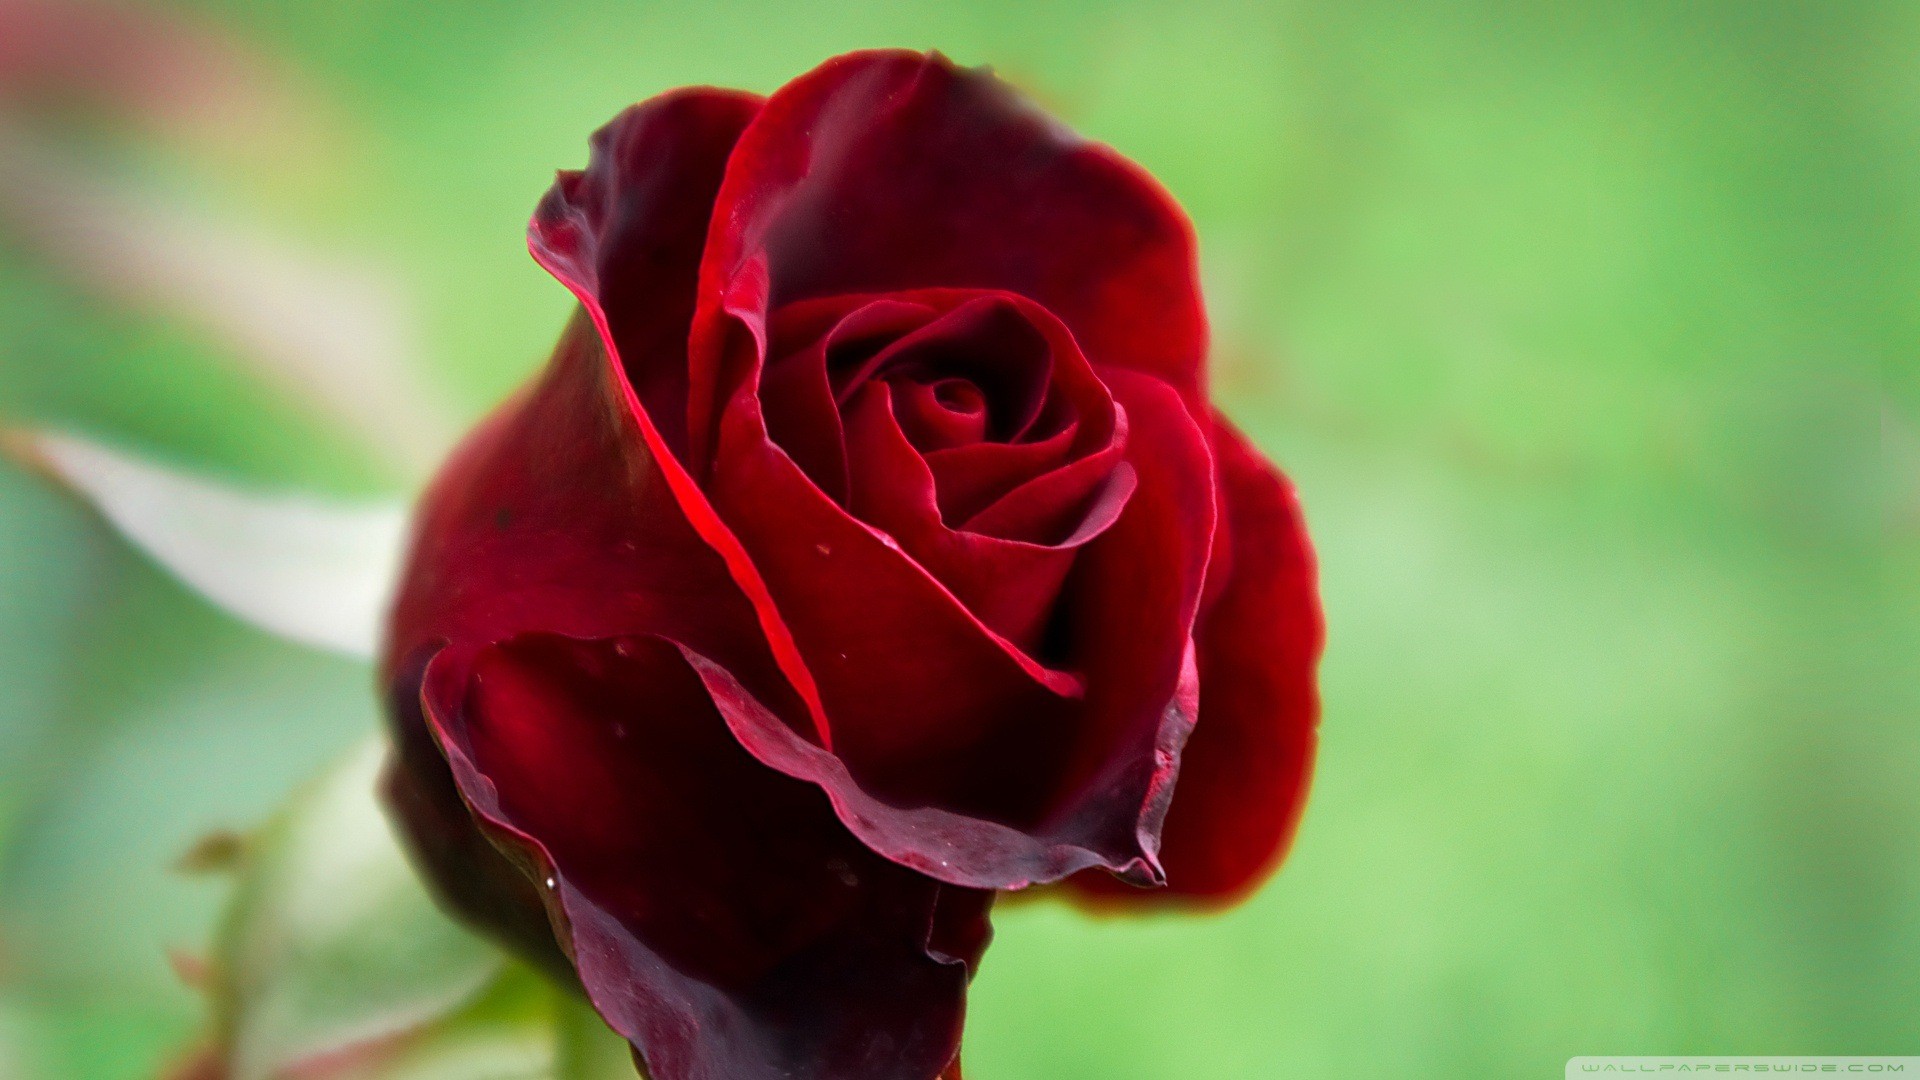 1920x1080 Rose Flowers Hd Wallpaper For Desktop Photos Of Androids